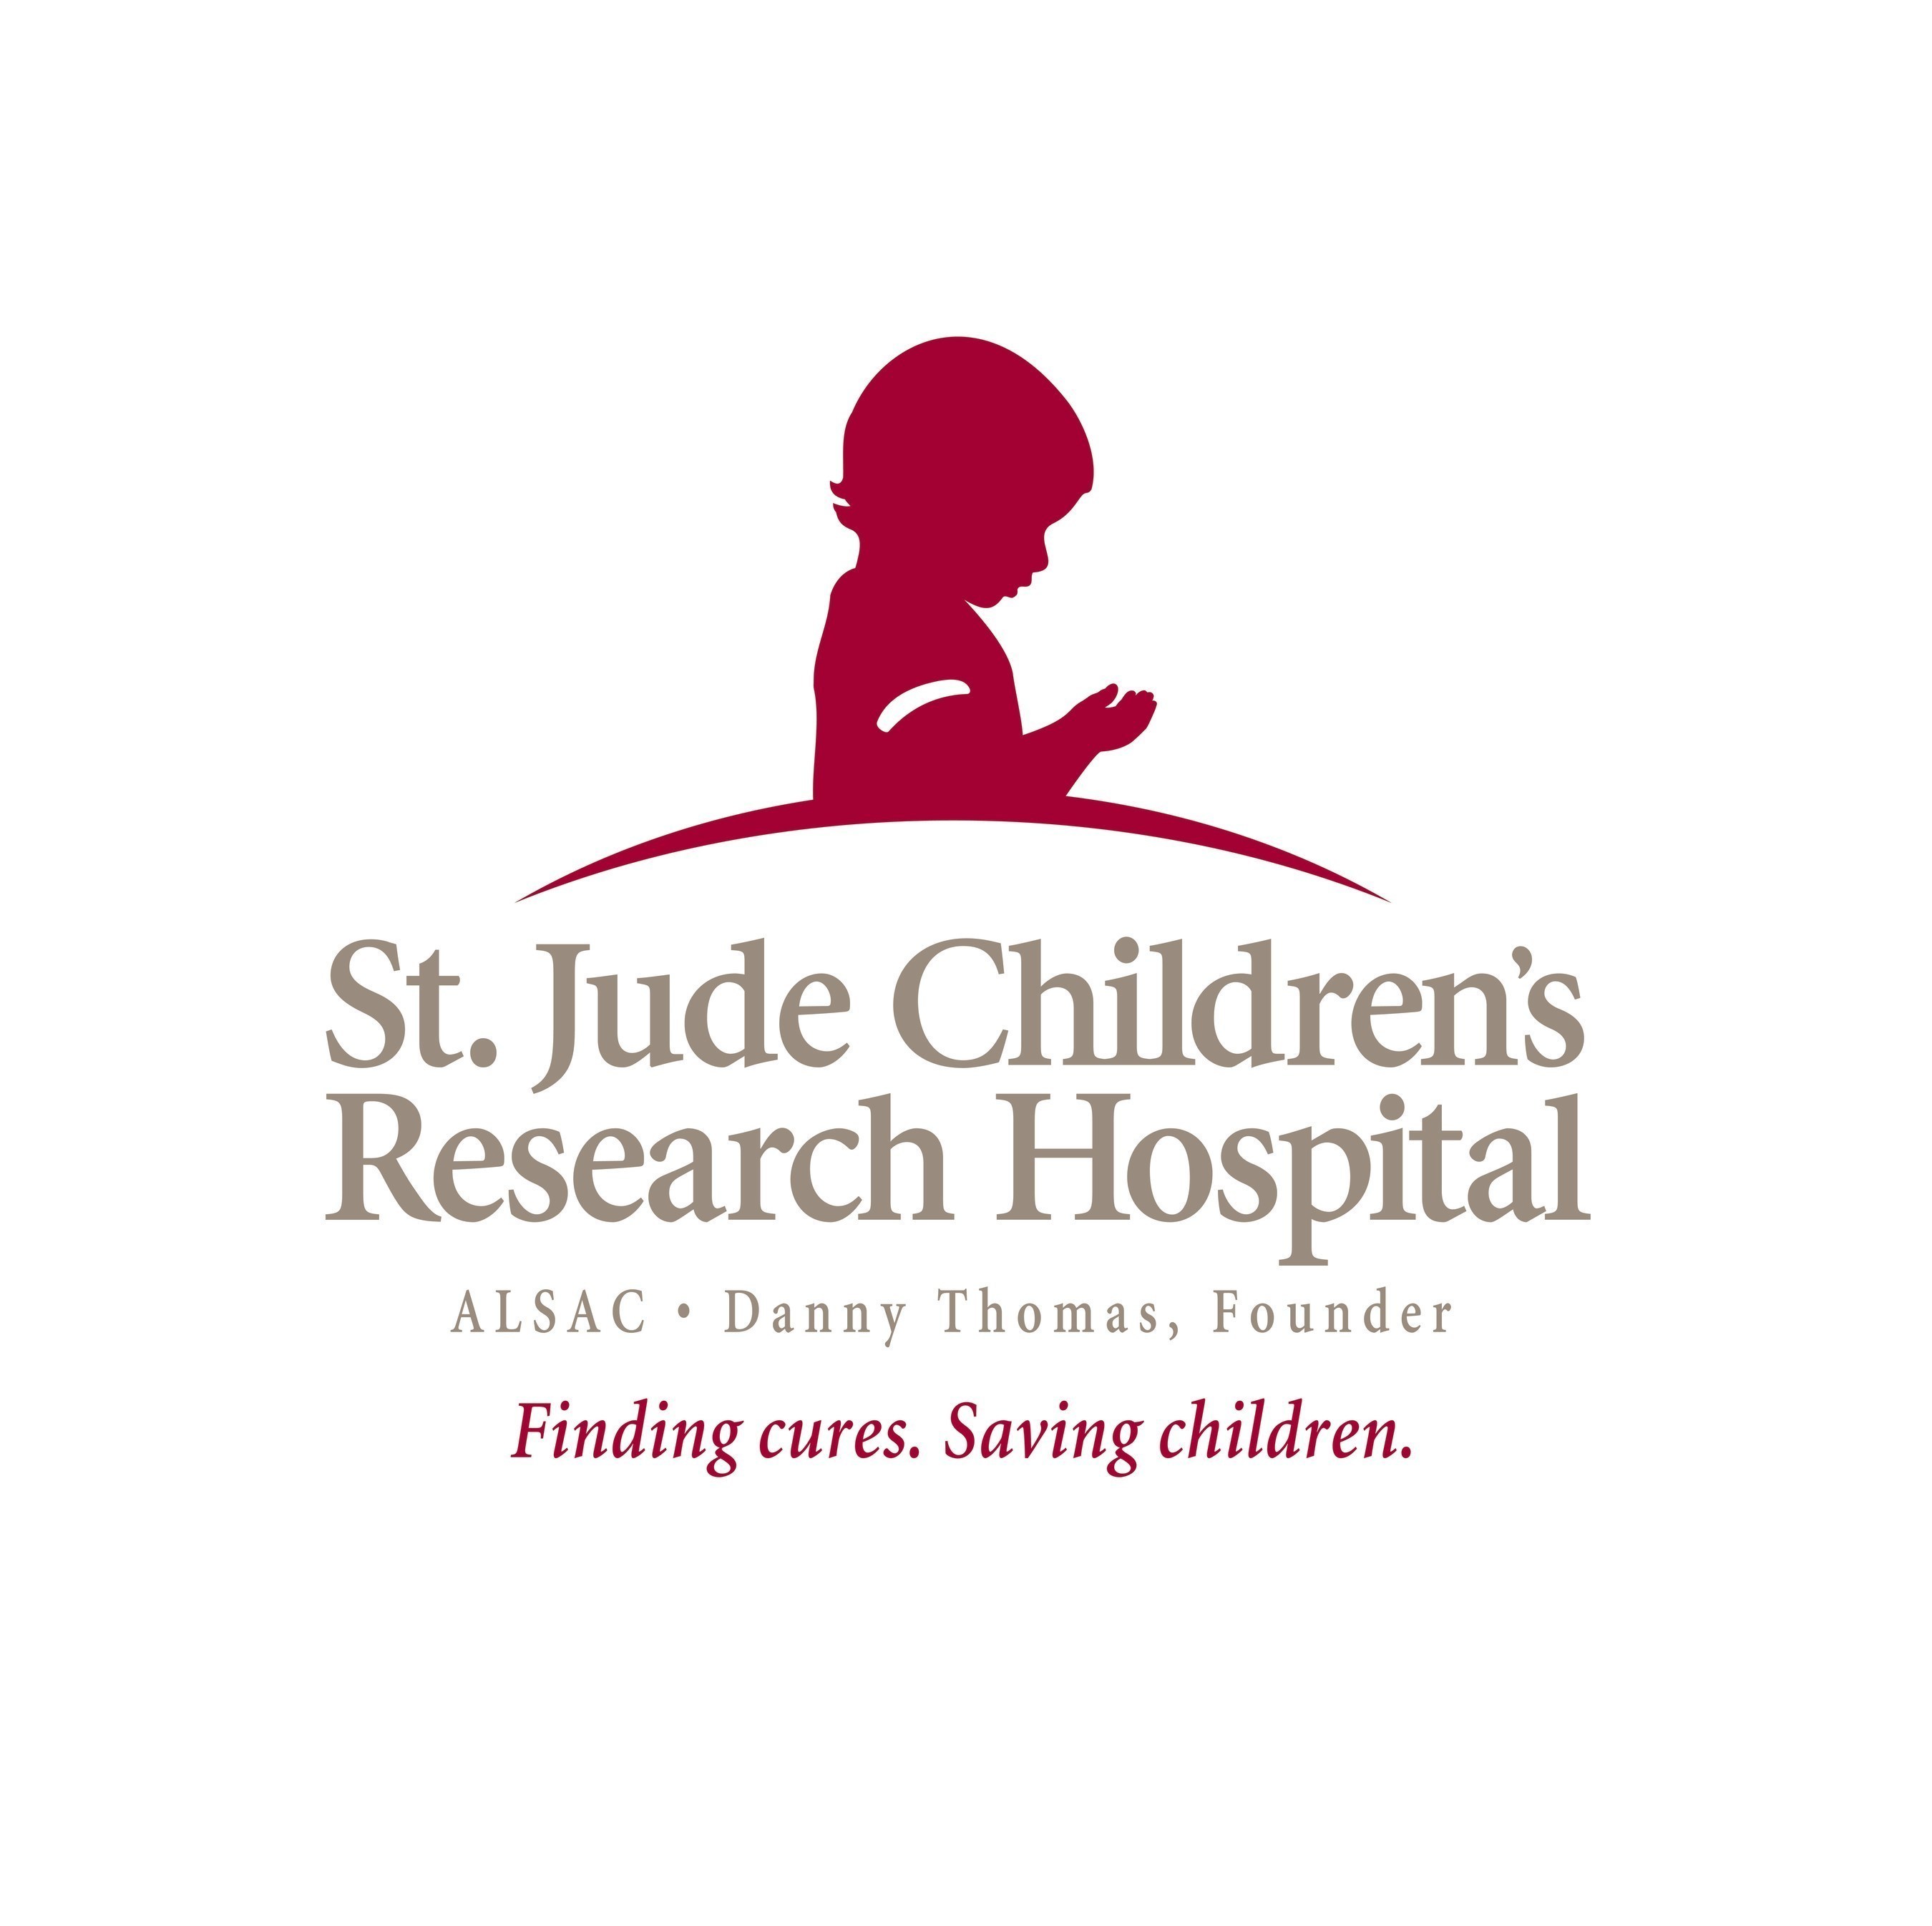 media-statement-from-st-jude-children-s-research-hospital-issued